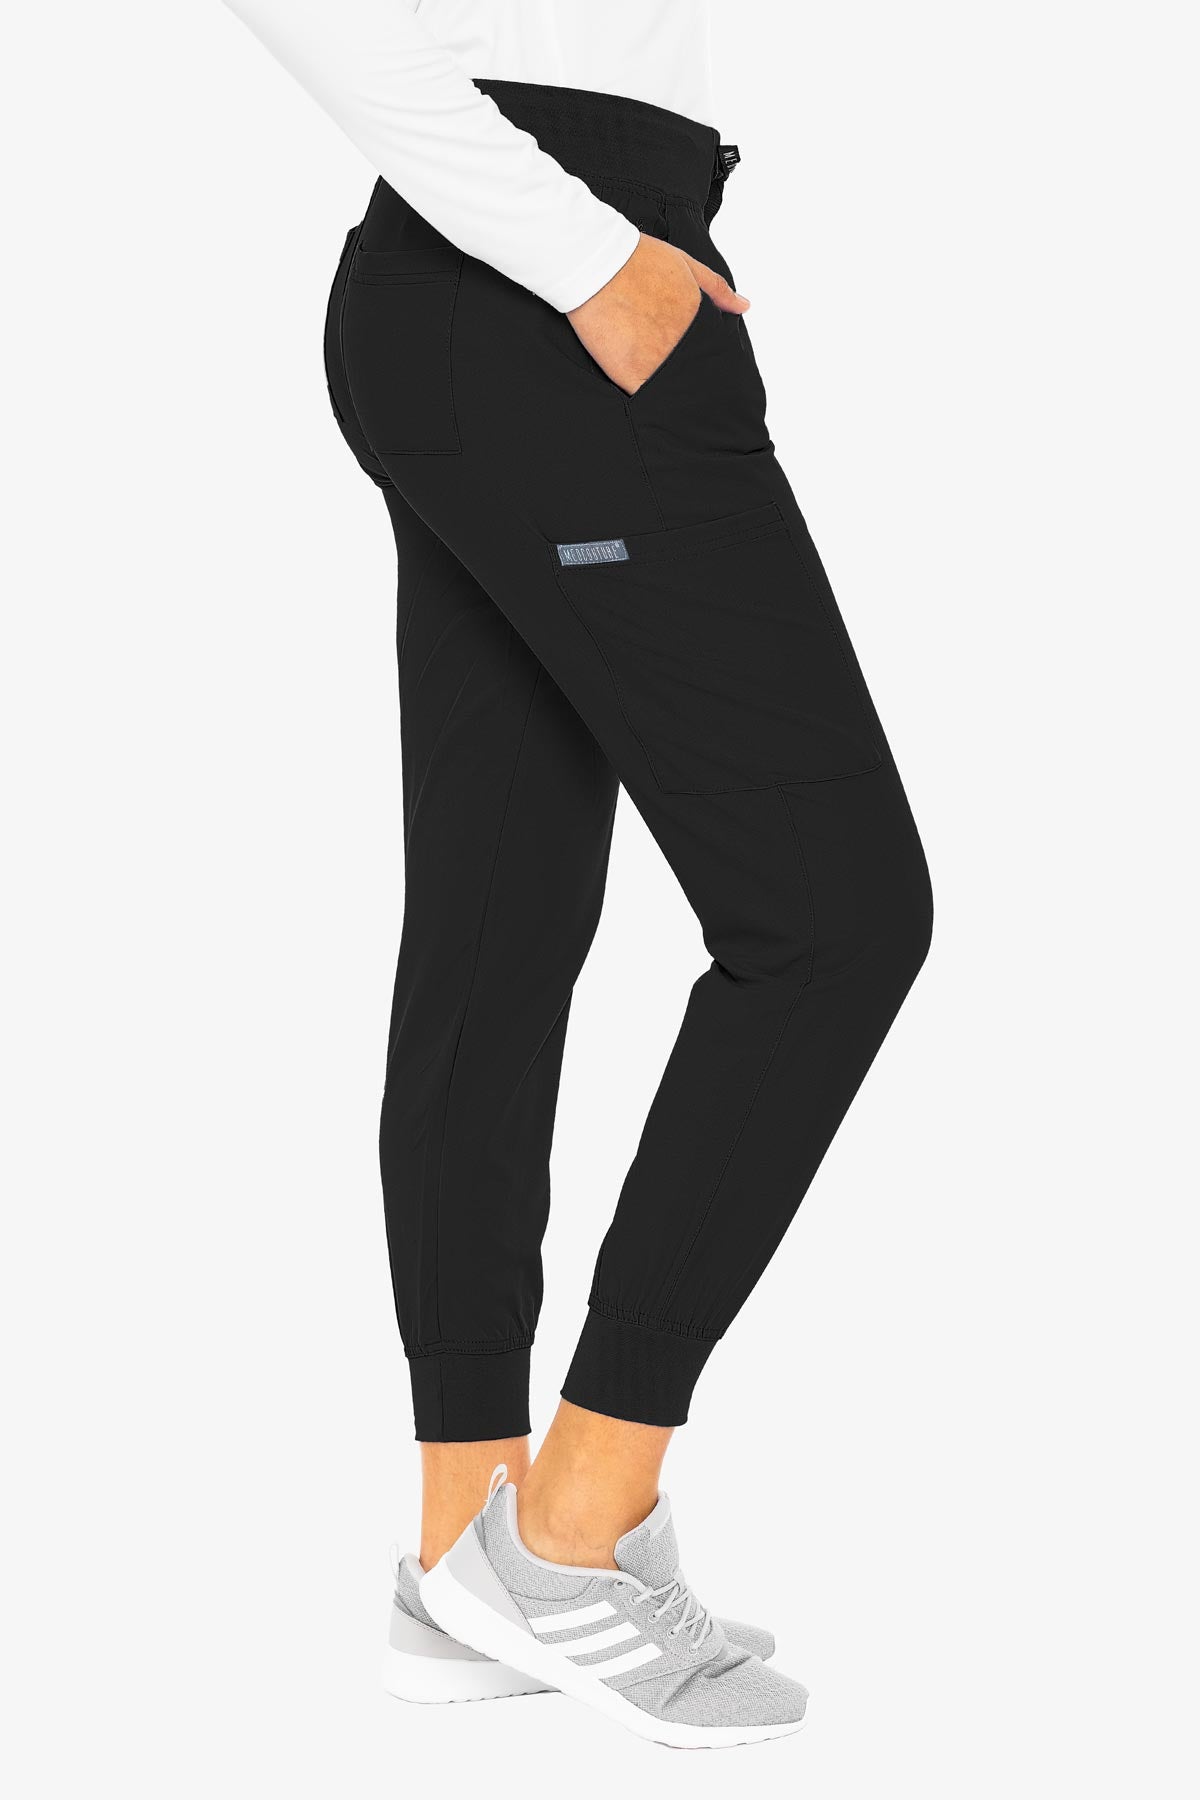 Med Couture Joggers (Black)